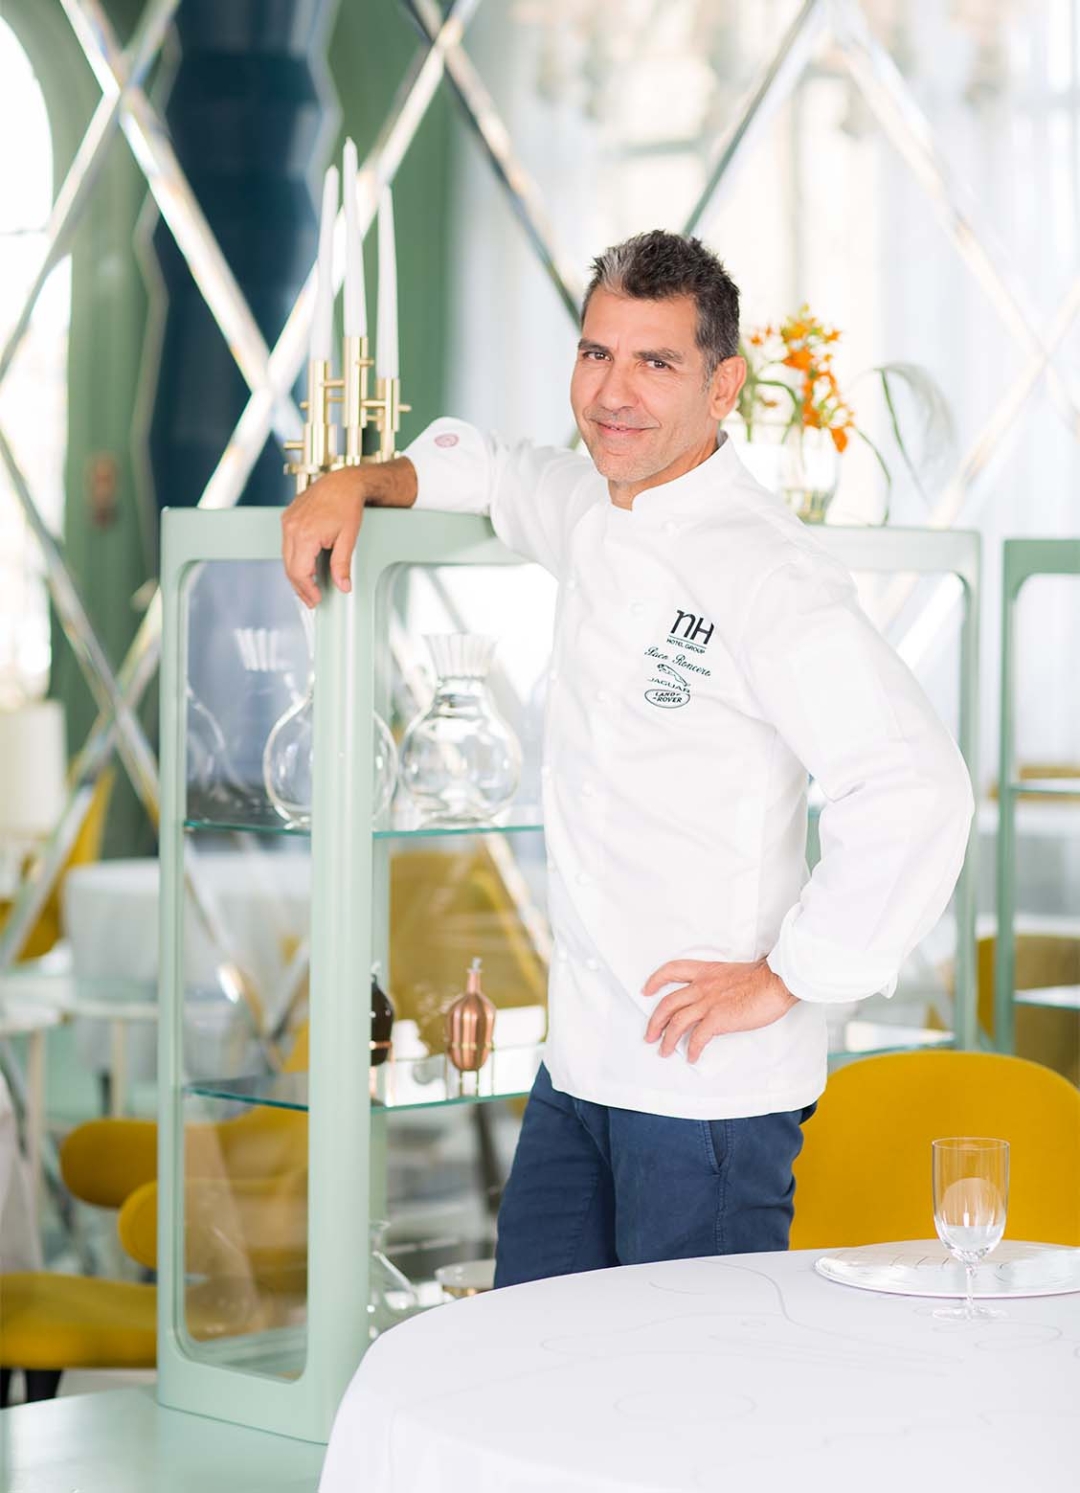 Paco Roncero, chef with two Michelin stars